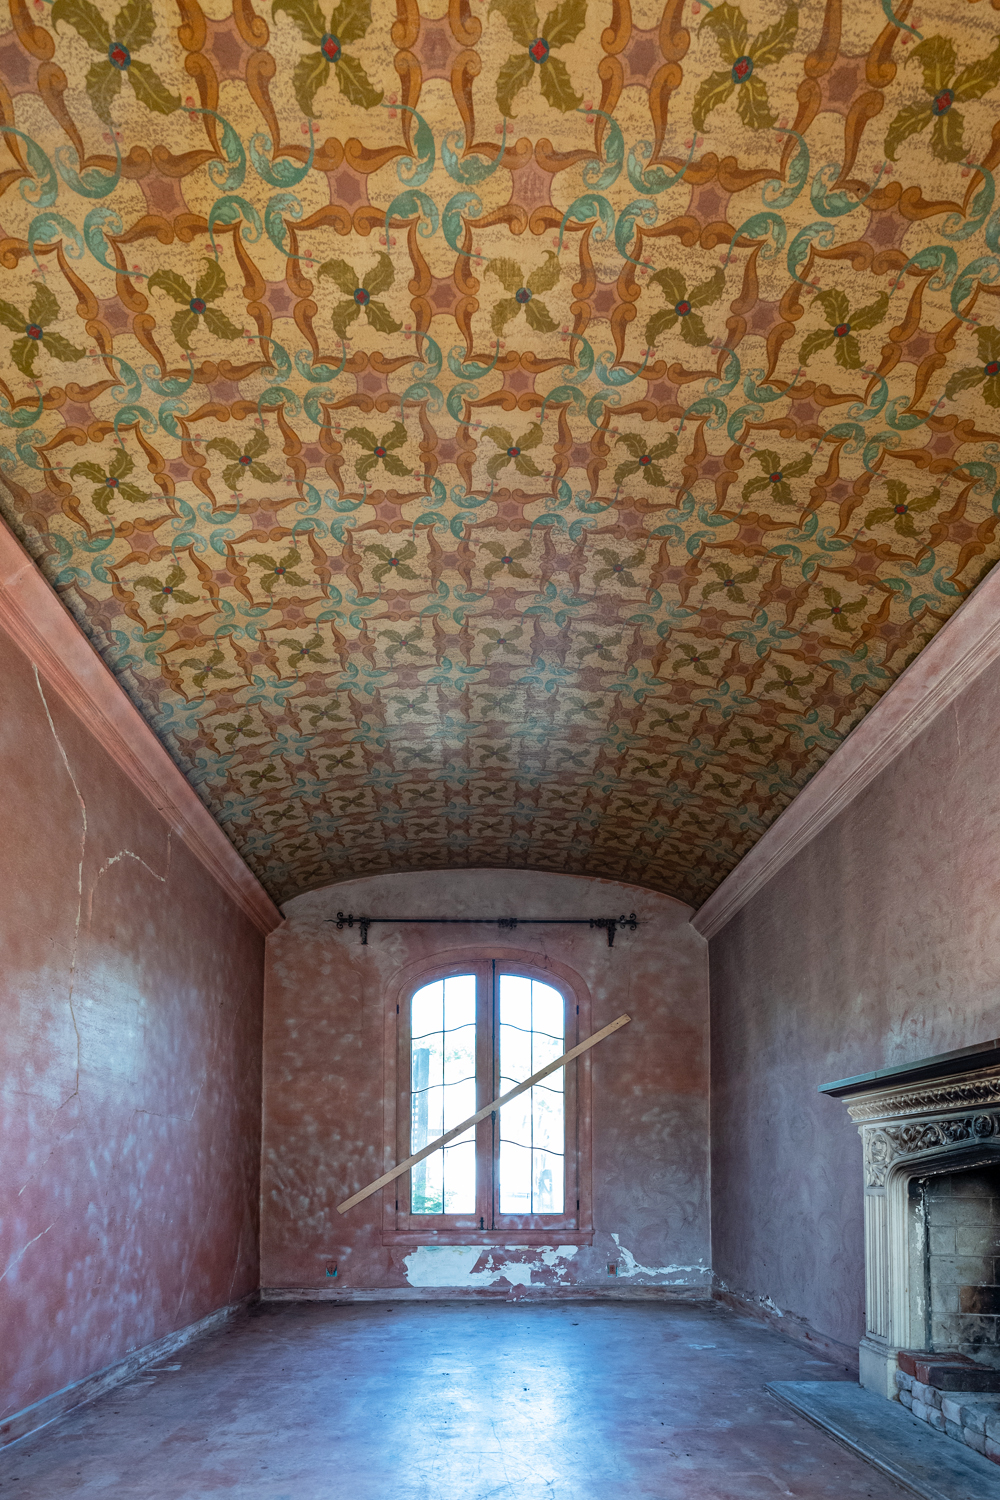 A gorgeous painted barrel ceiling that is more than 100 years old